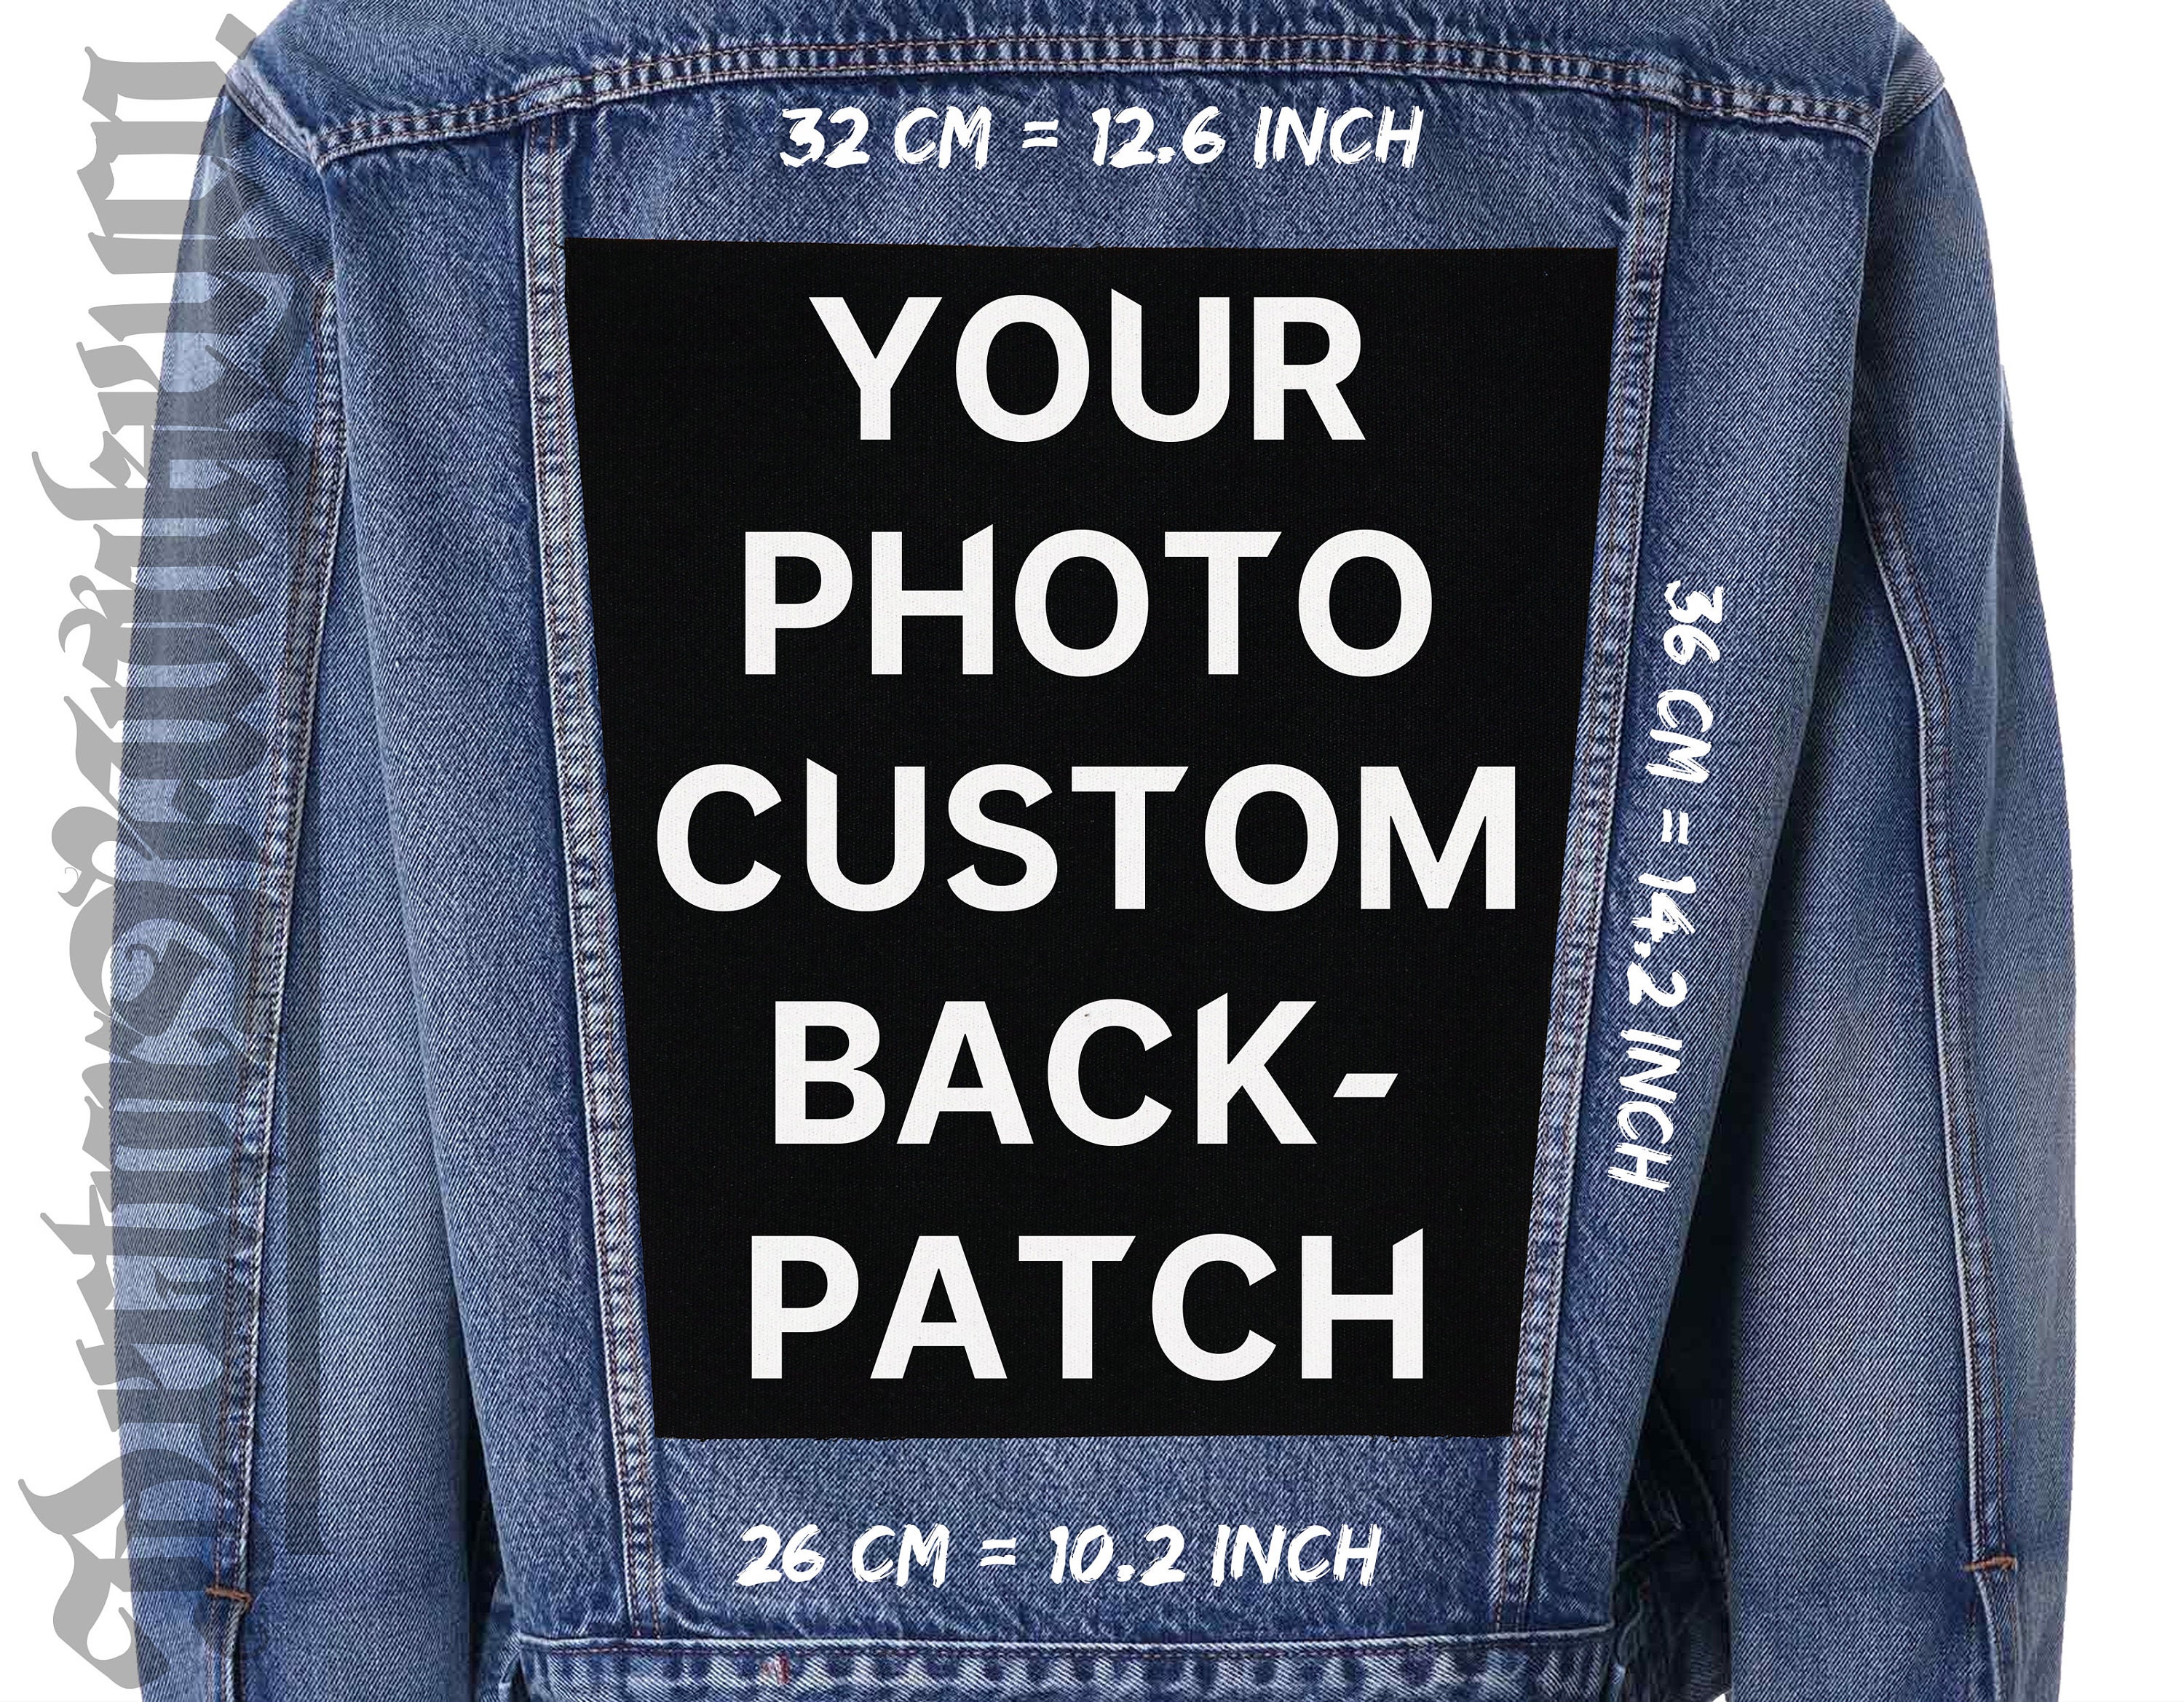 Affordable Custom Patches for Jackets, Order Now